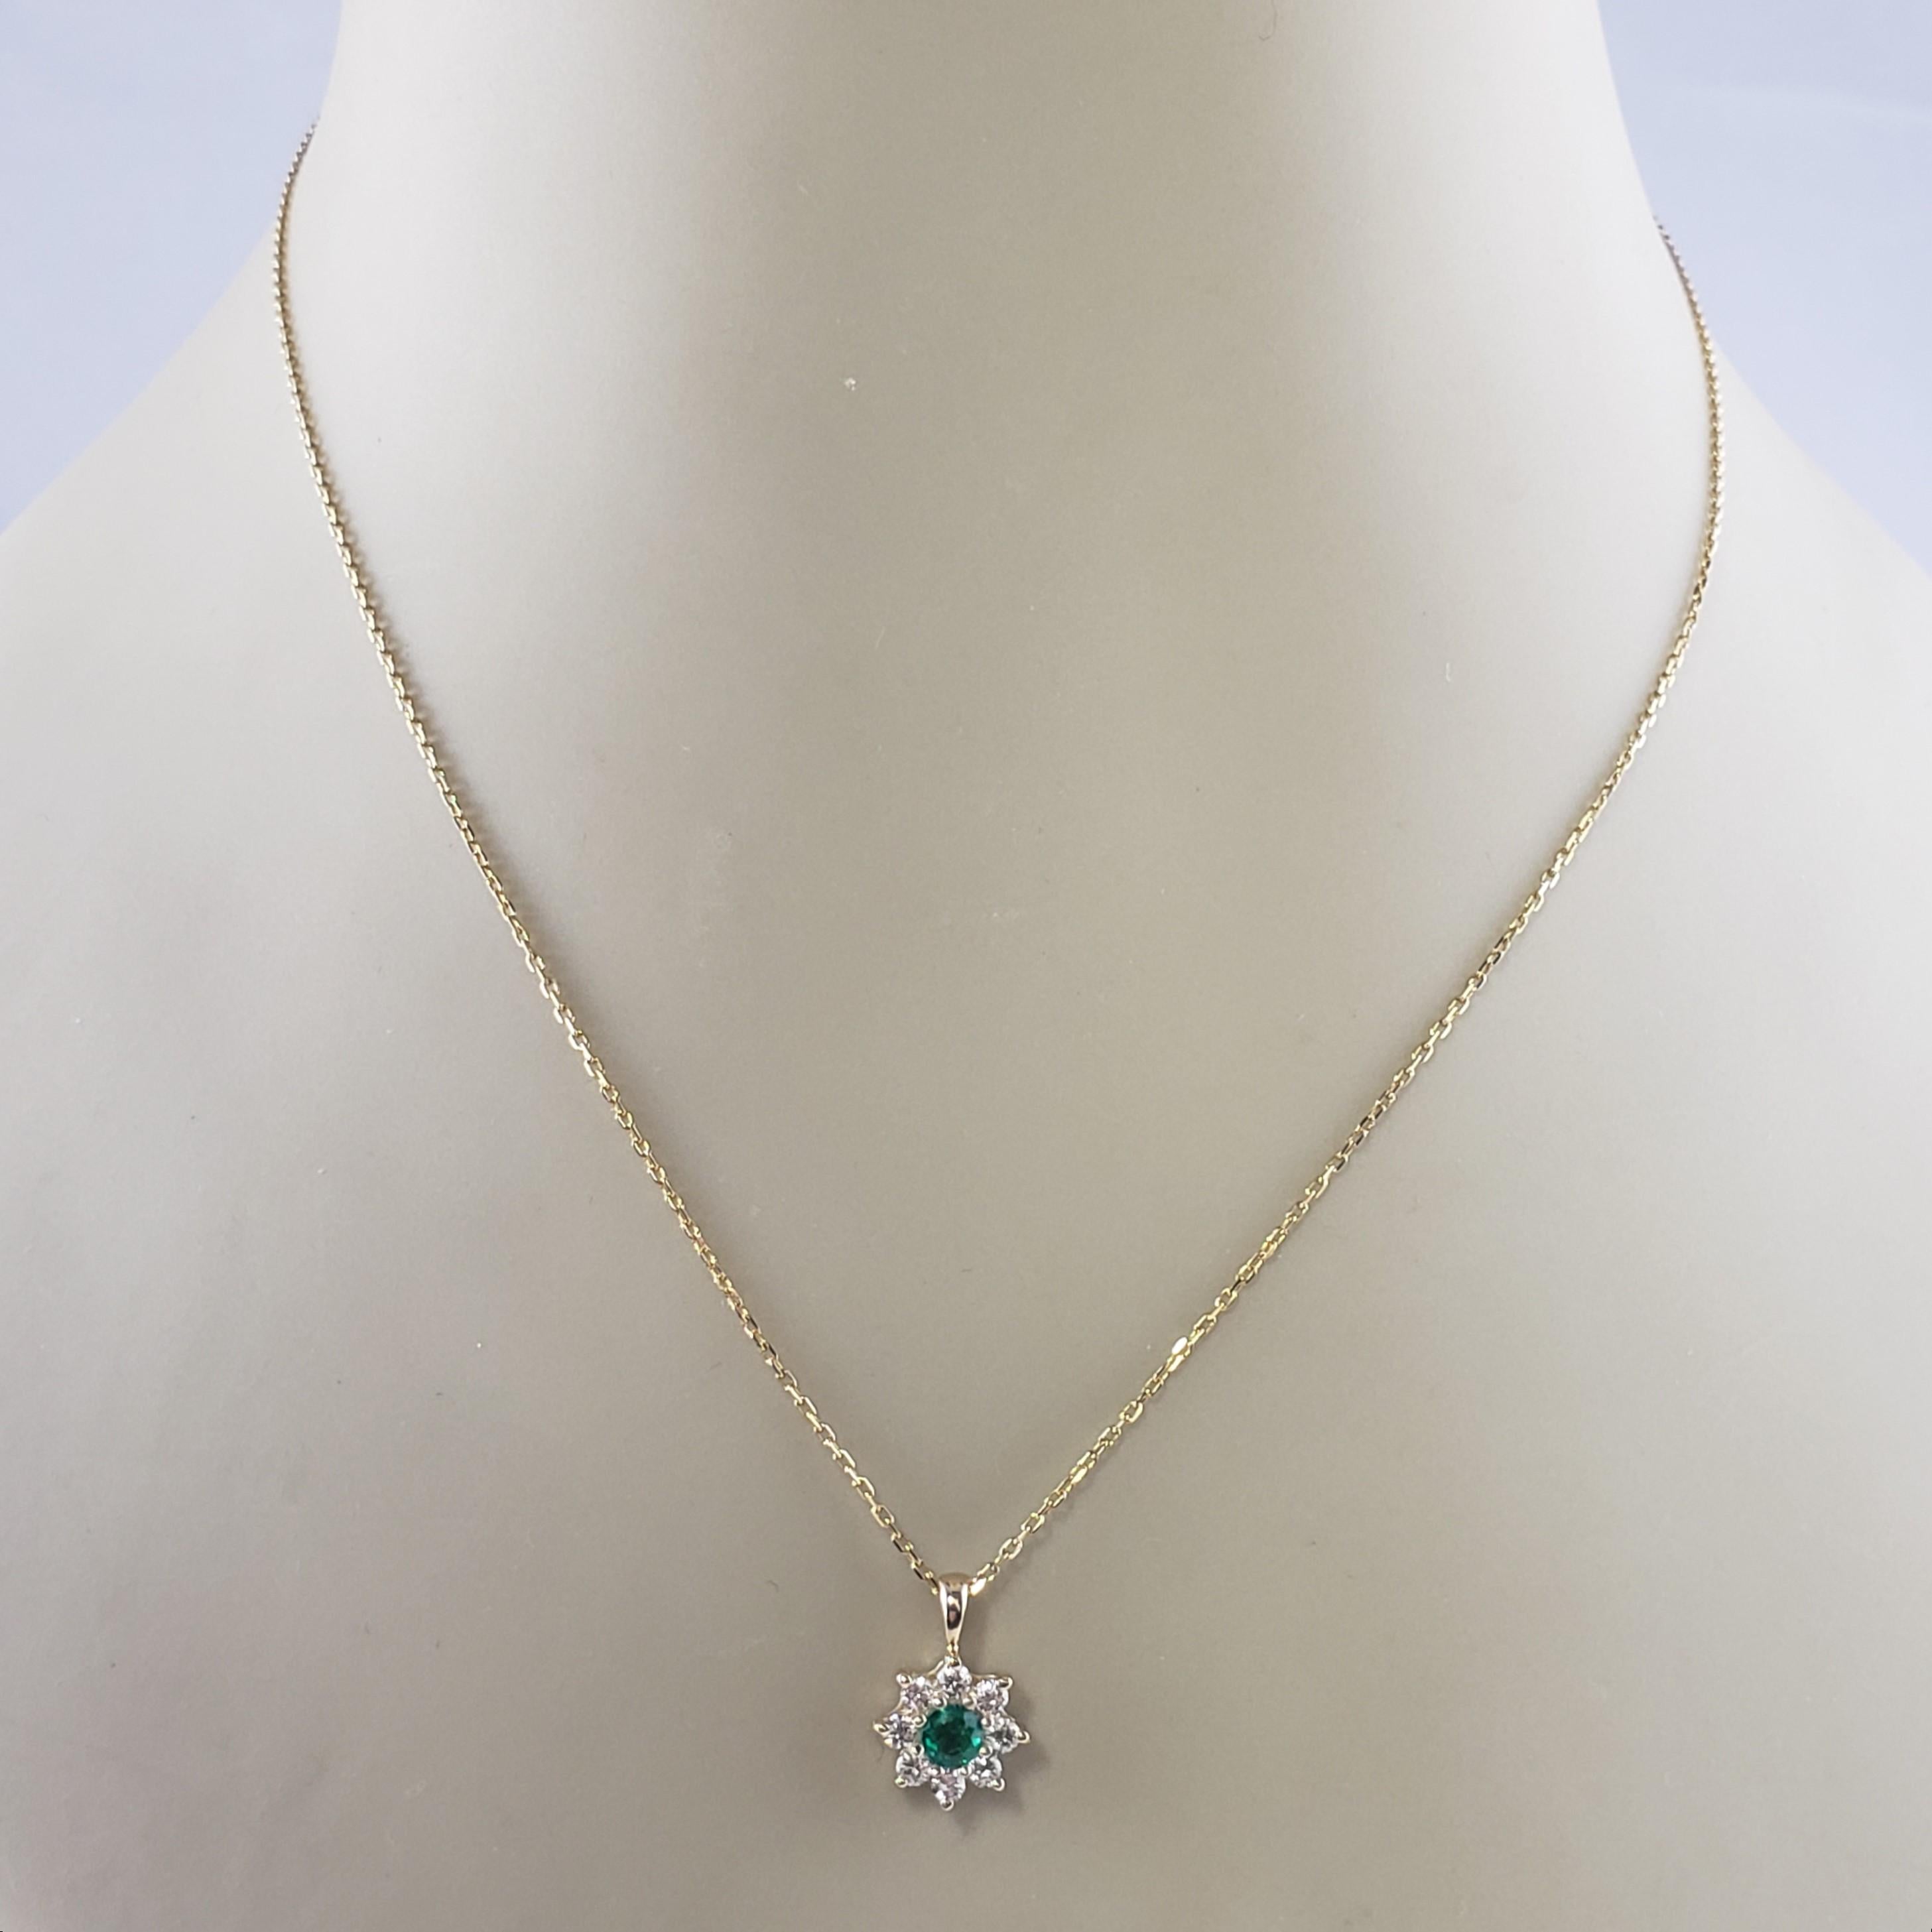 14 Karat Yellow Gold Emerald and Diamond Pendant Necklace #15694 For Sale 2